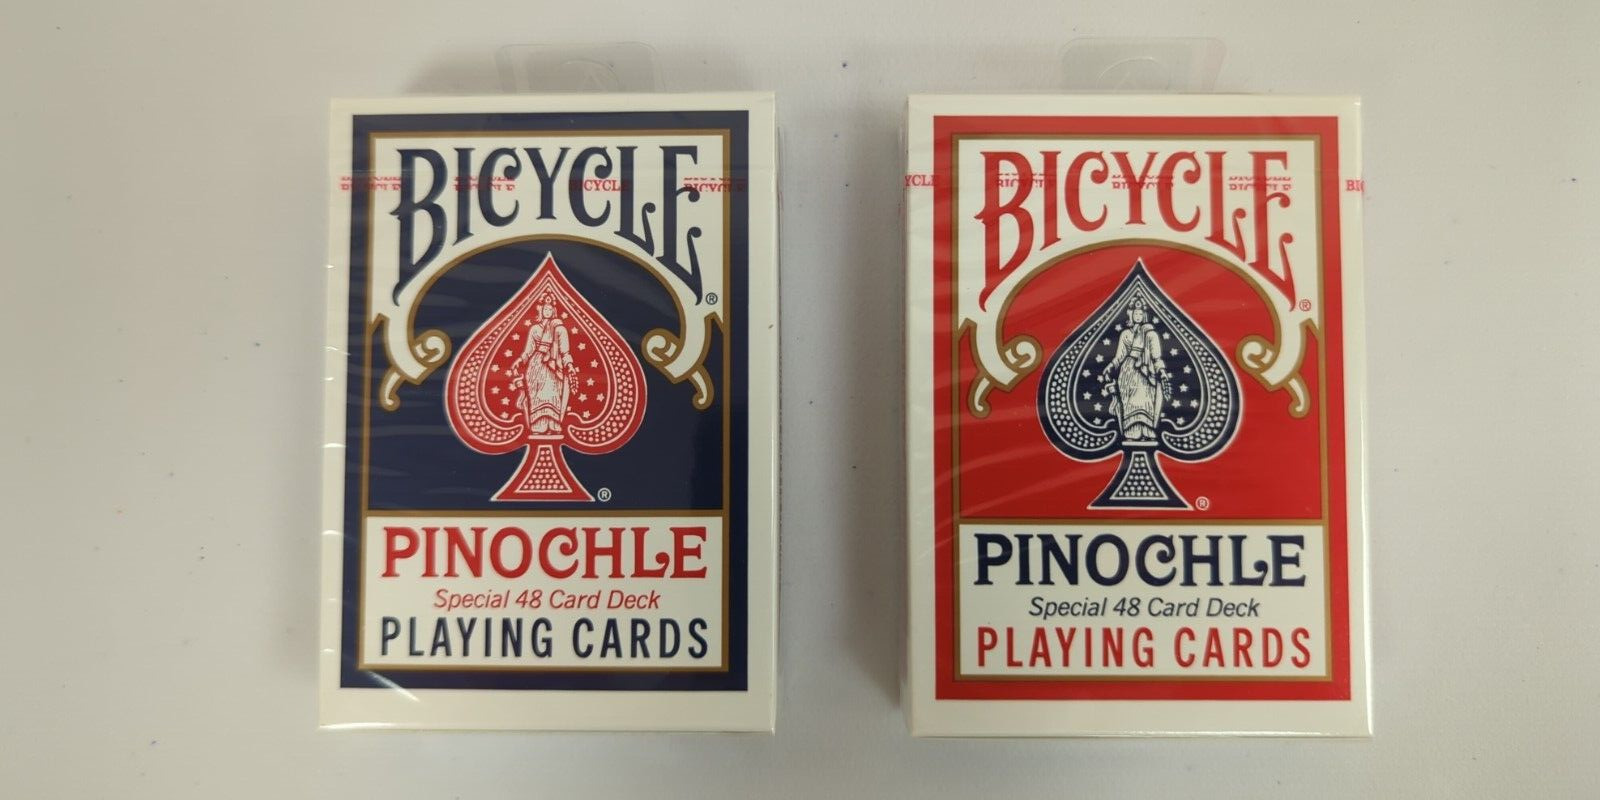 NEW SEALED TWO (2) Bicycle Pinochle Decks (Red & Blue), US Playing Card Company